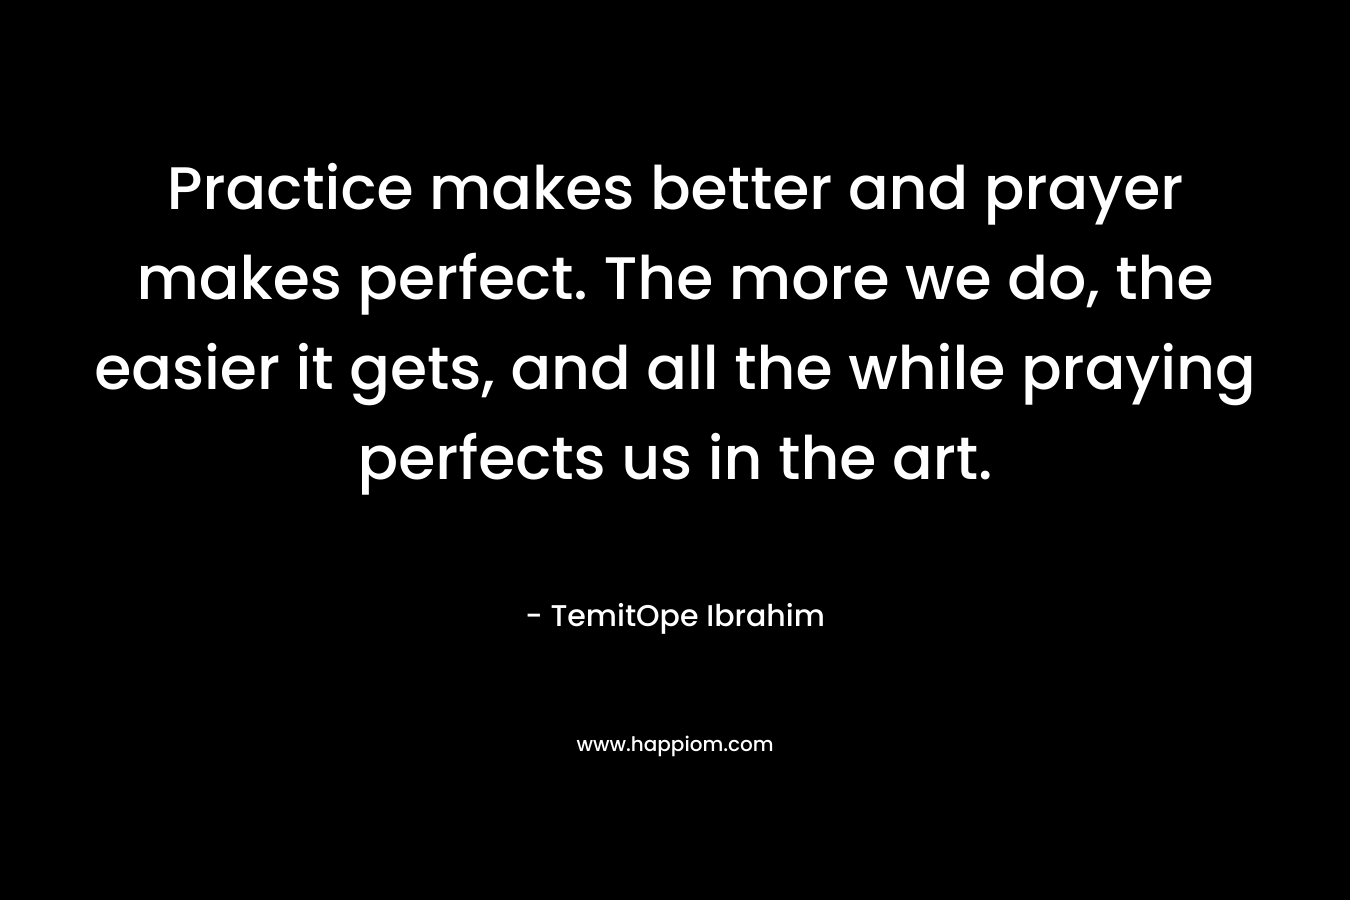 Practice makes better and prayer makes perfect. The more we do, the easier it gets, and all the while praying perfects us in the art. – TemitOpe Ibrahim